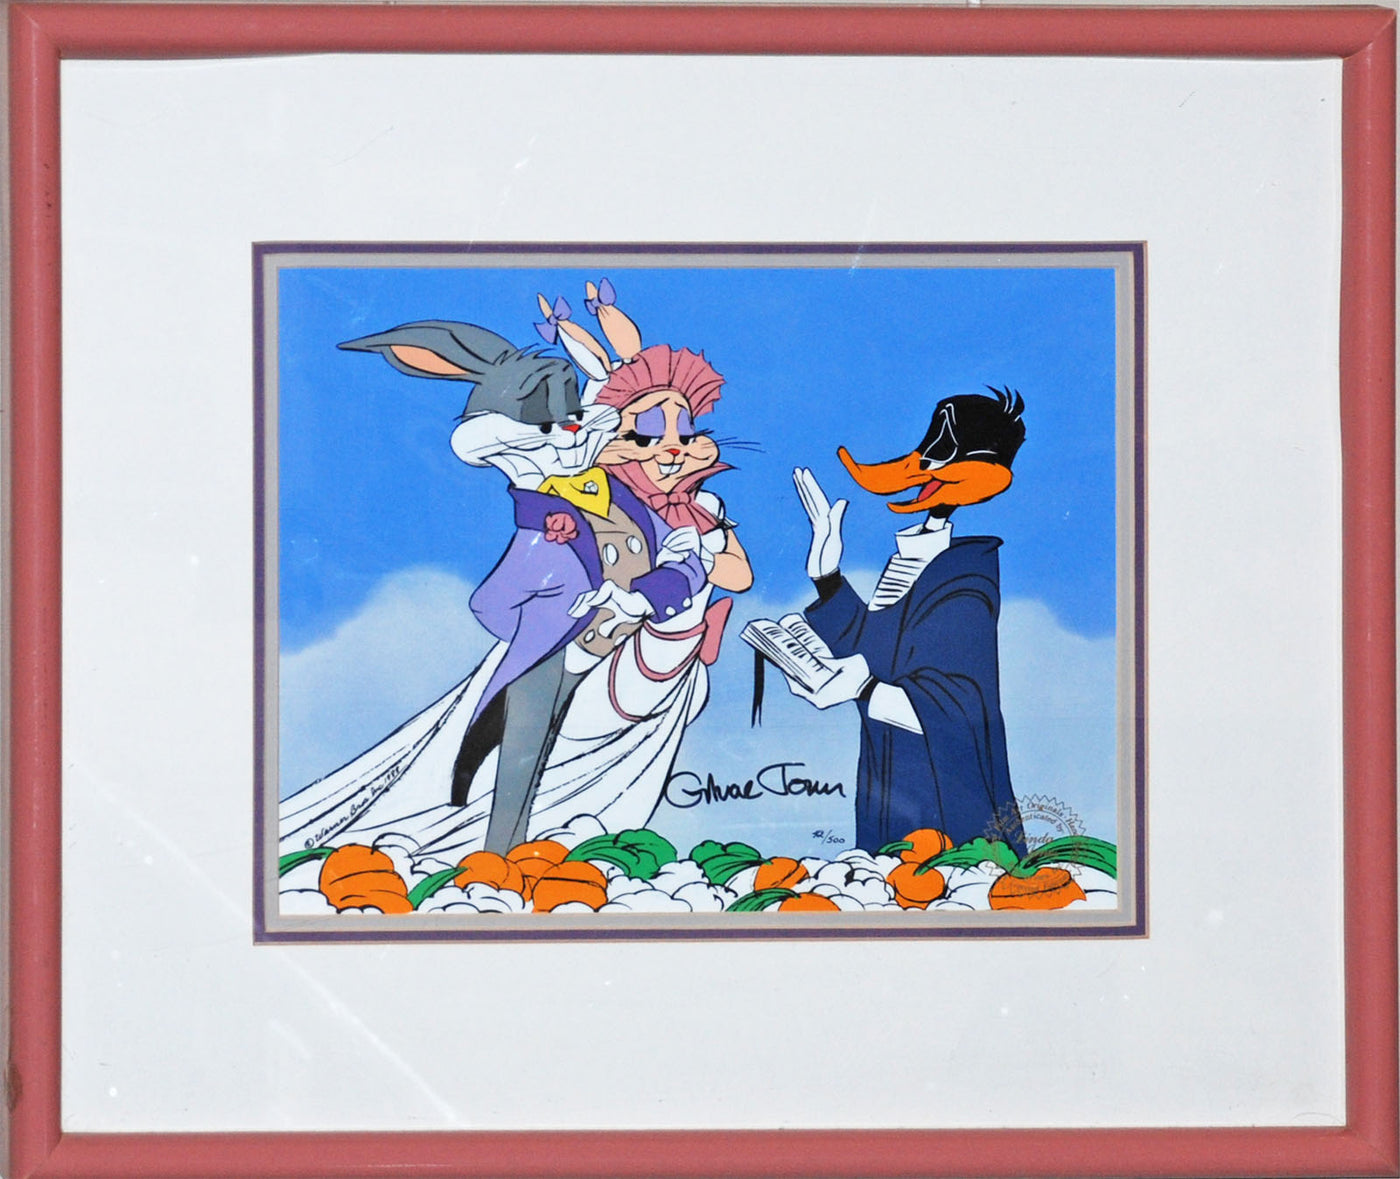 Original Warner brothers Limited Edition Cel, "Marriage Made In Heaven" featuring Bugs Bunny